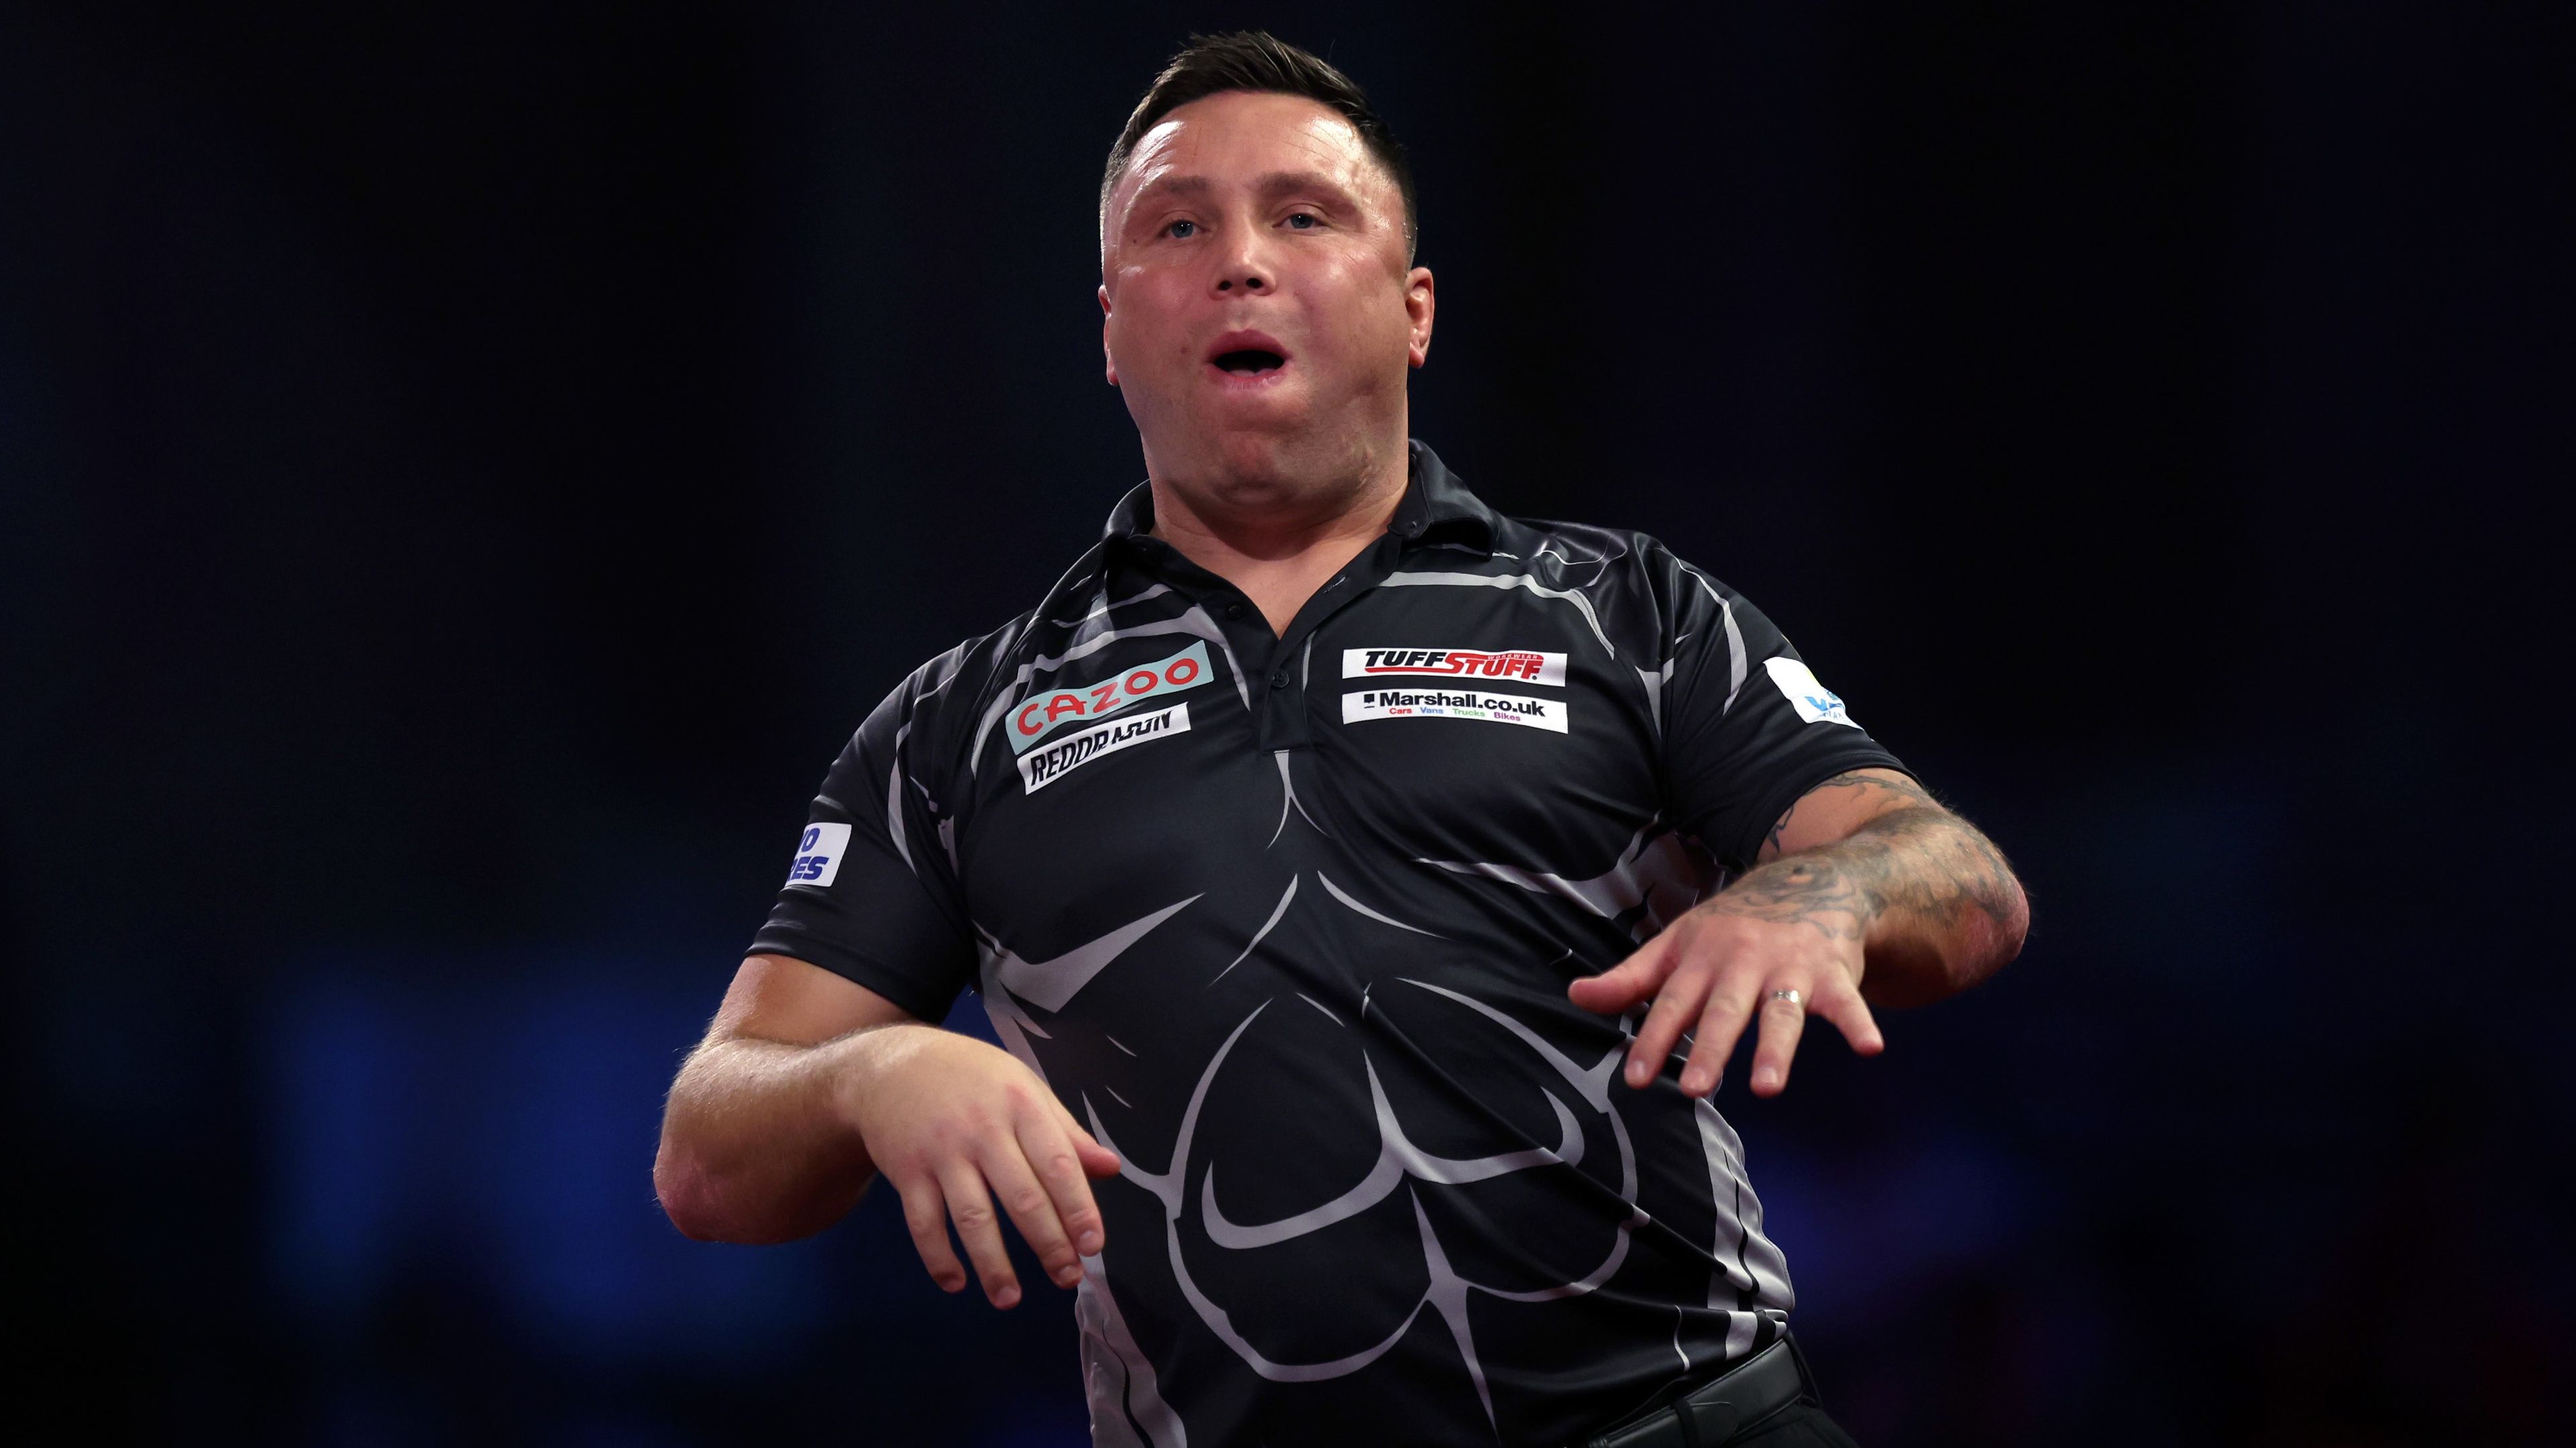 Gerwyn Price reacts after missing a triple 20 during his fourth round match against Jose de Sousa during the World Darts Championship.